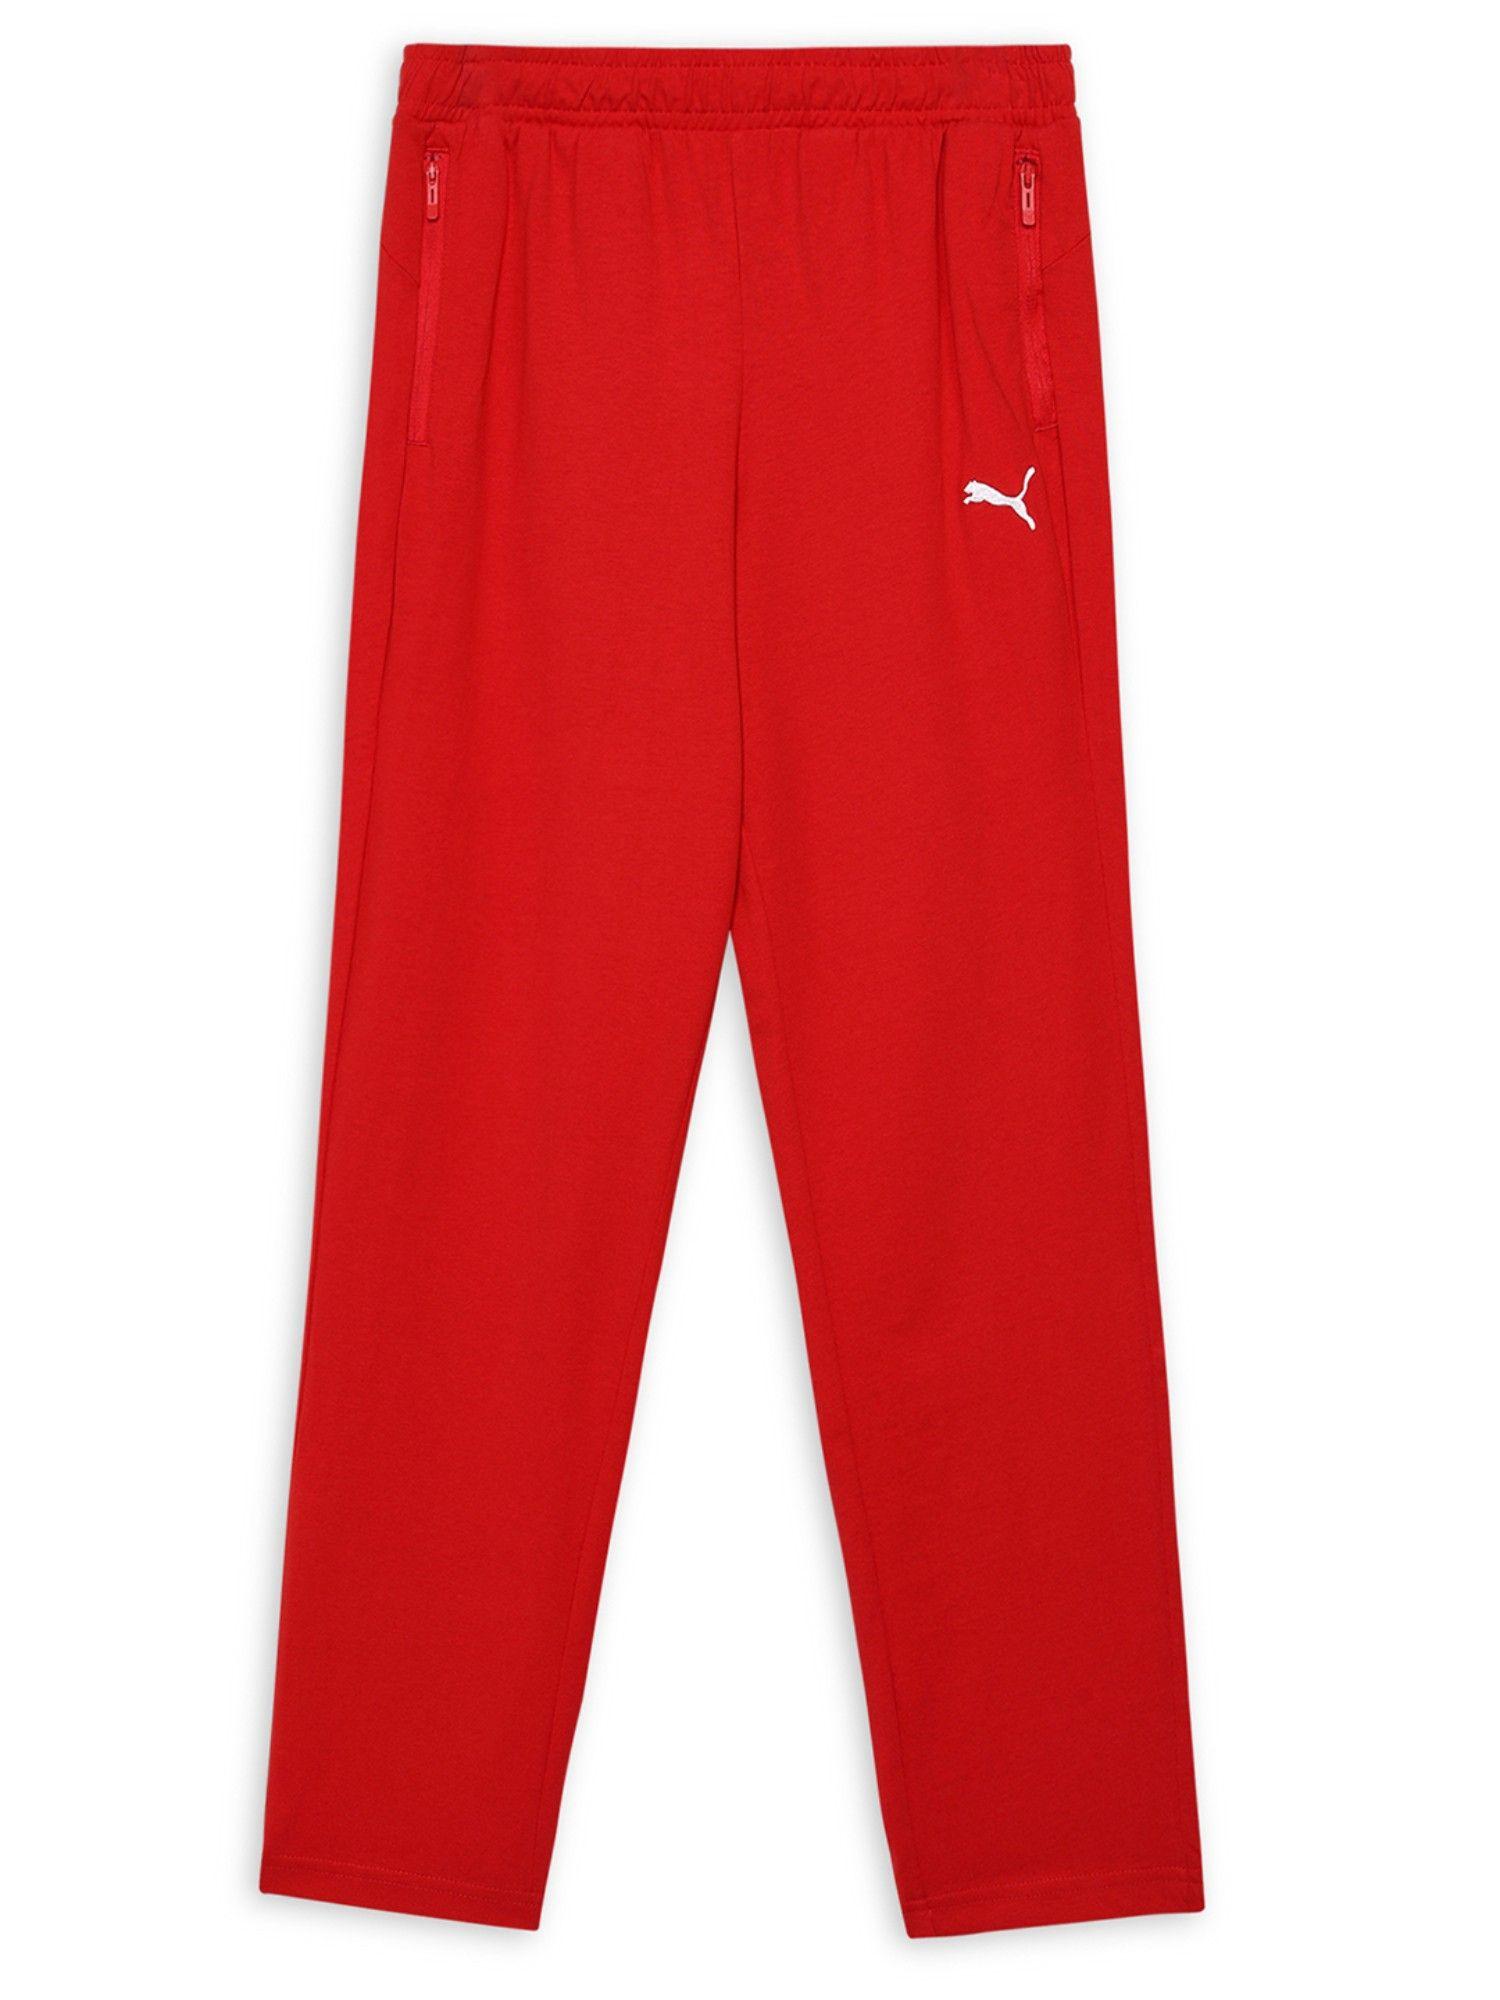 zippered-jersey-boys-red-pant